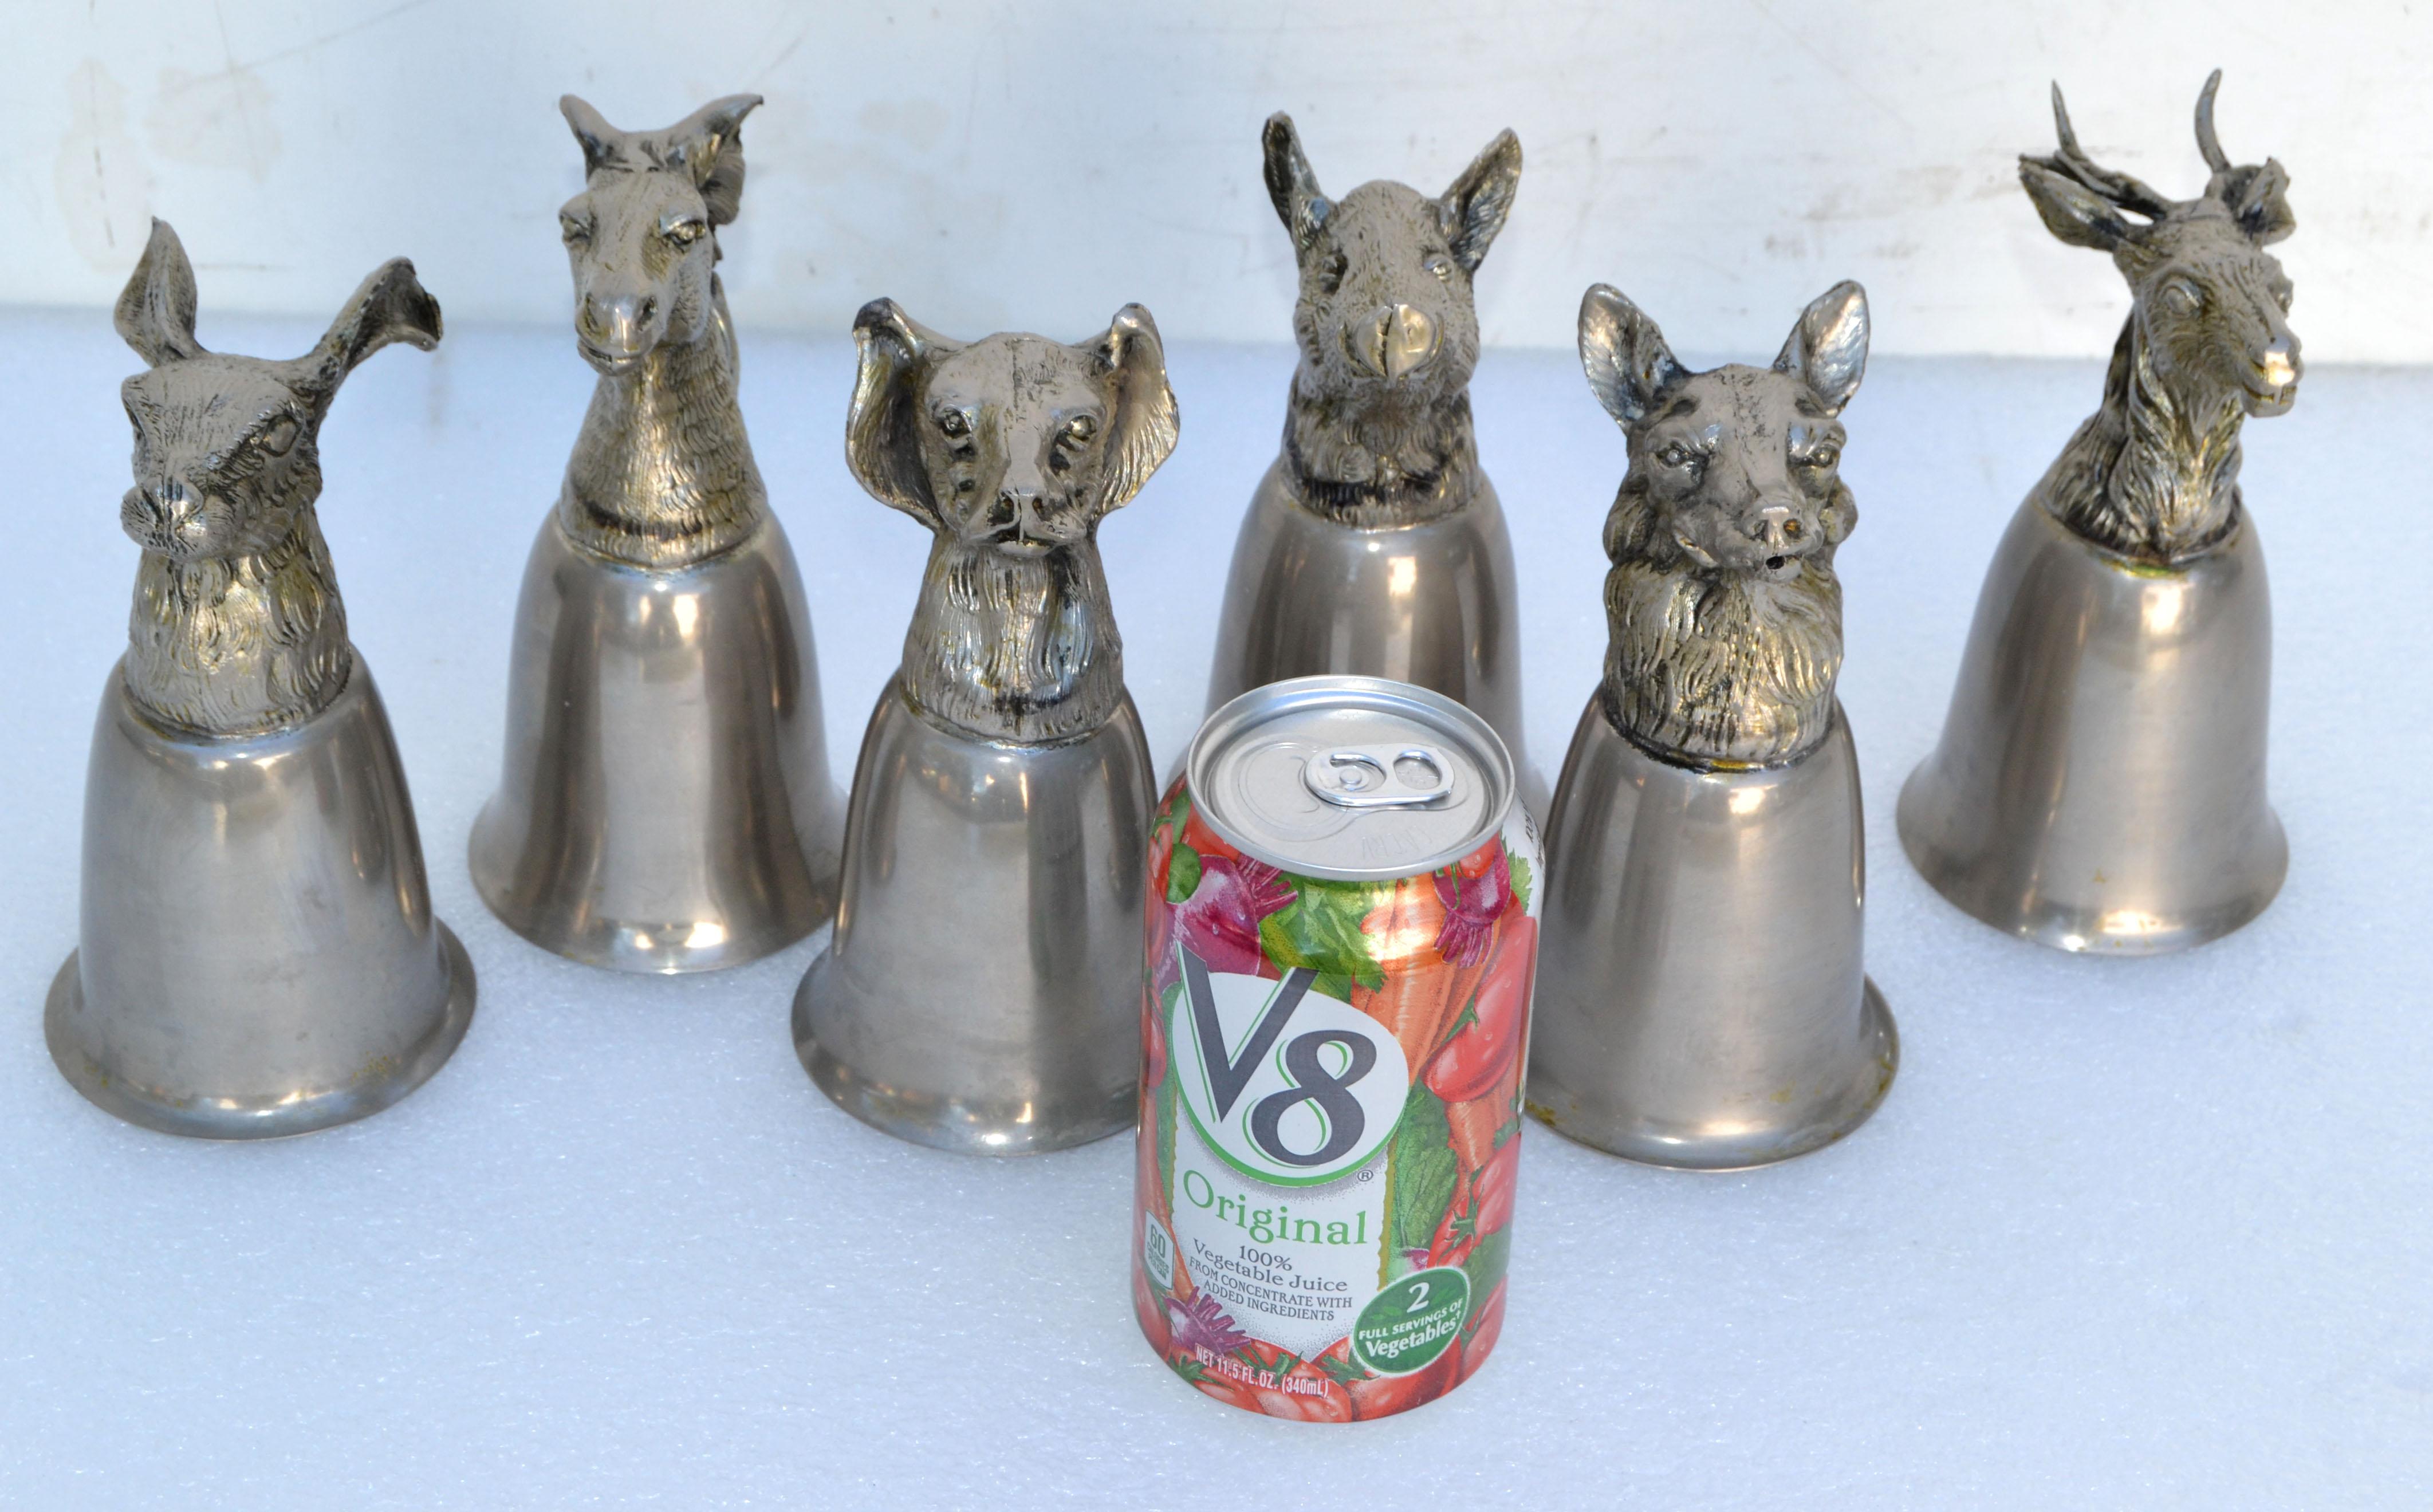 Six Mauro Manetti Silver Plate Animal Heads Stirrup Goblets Cups, Made in Italy 1